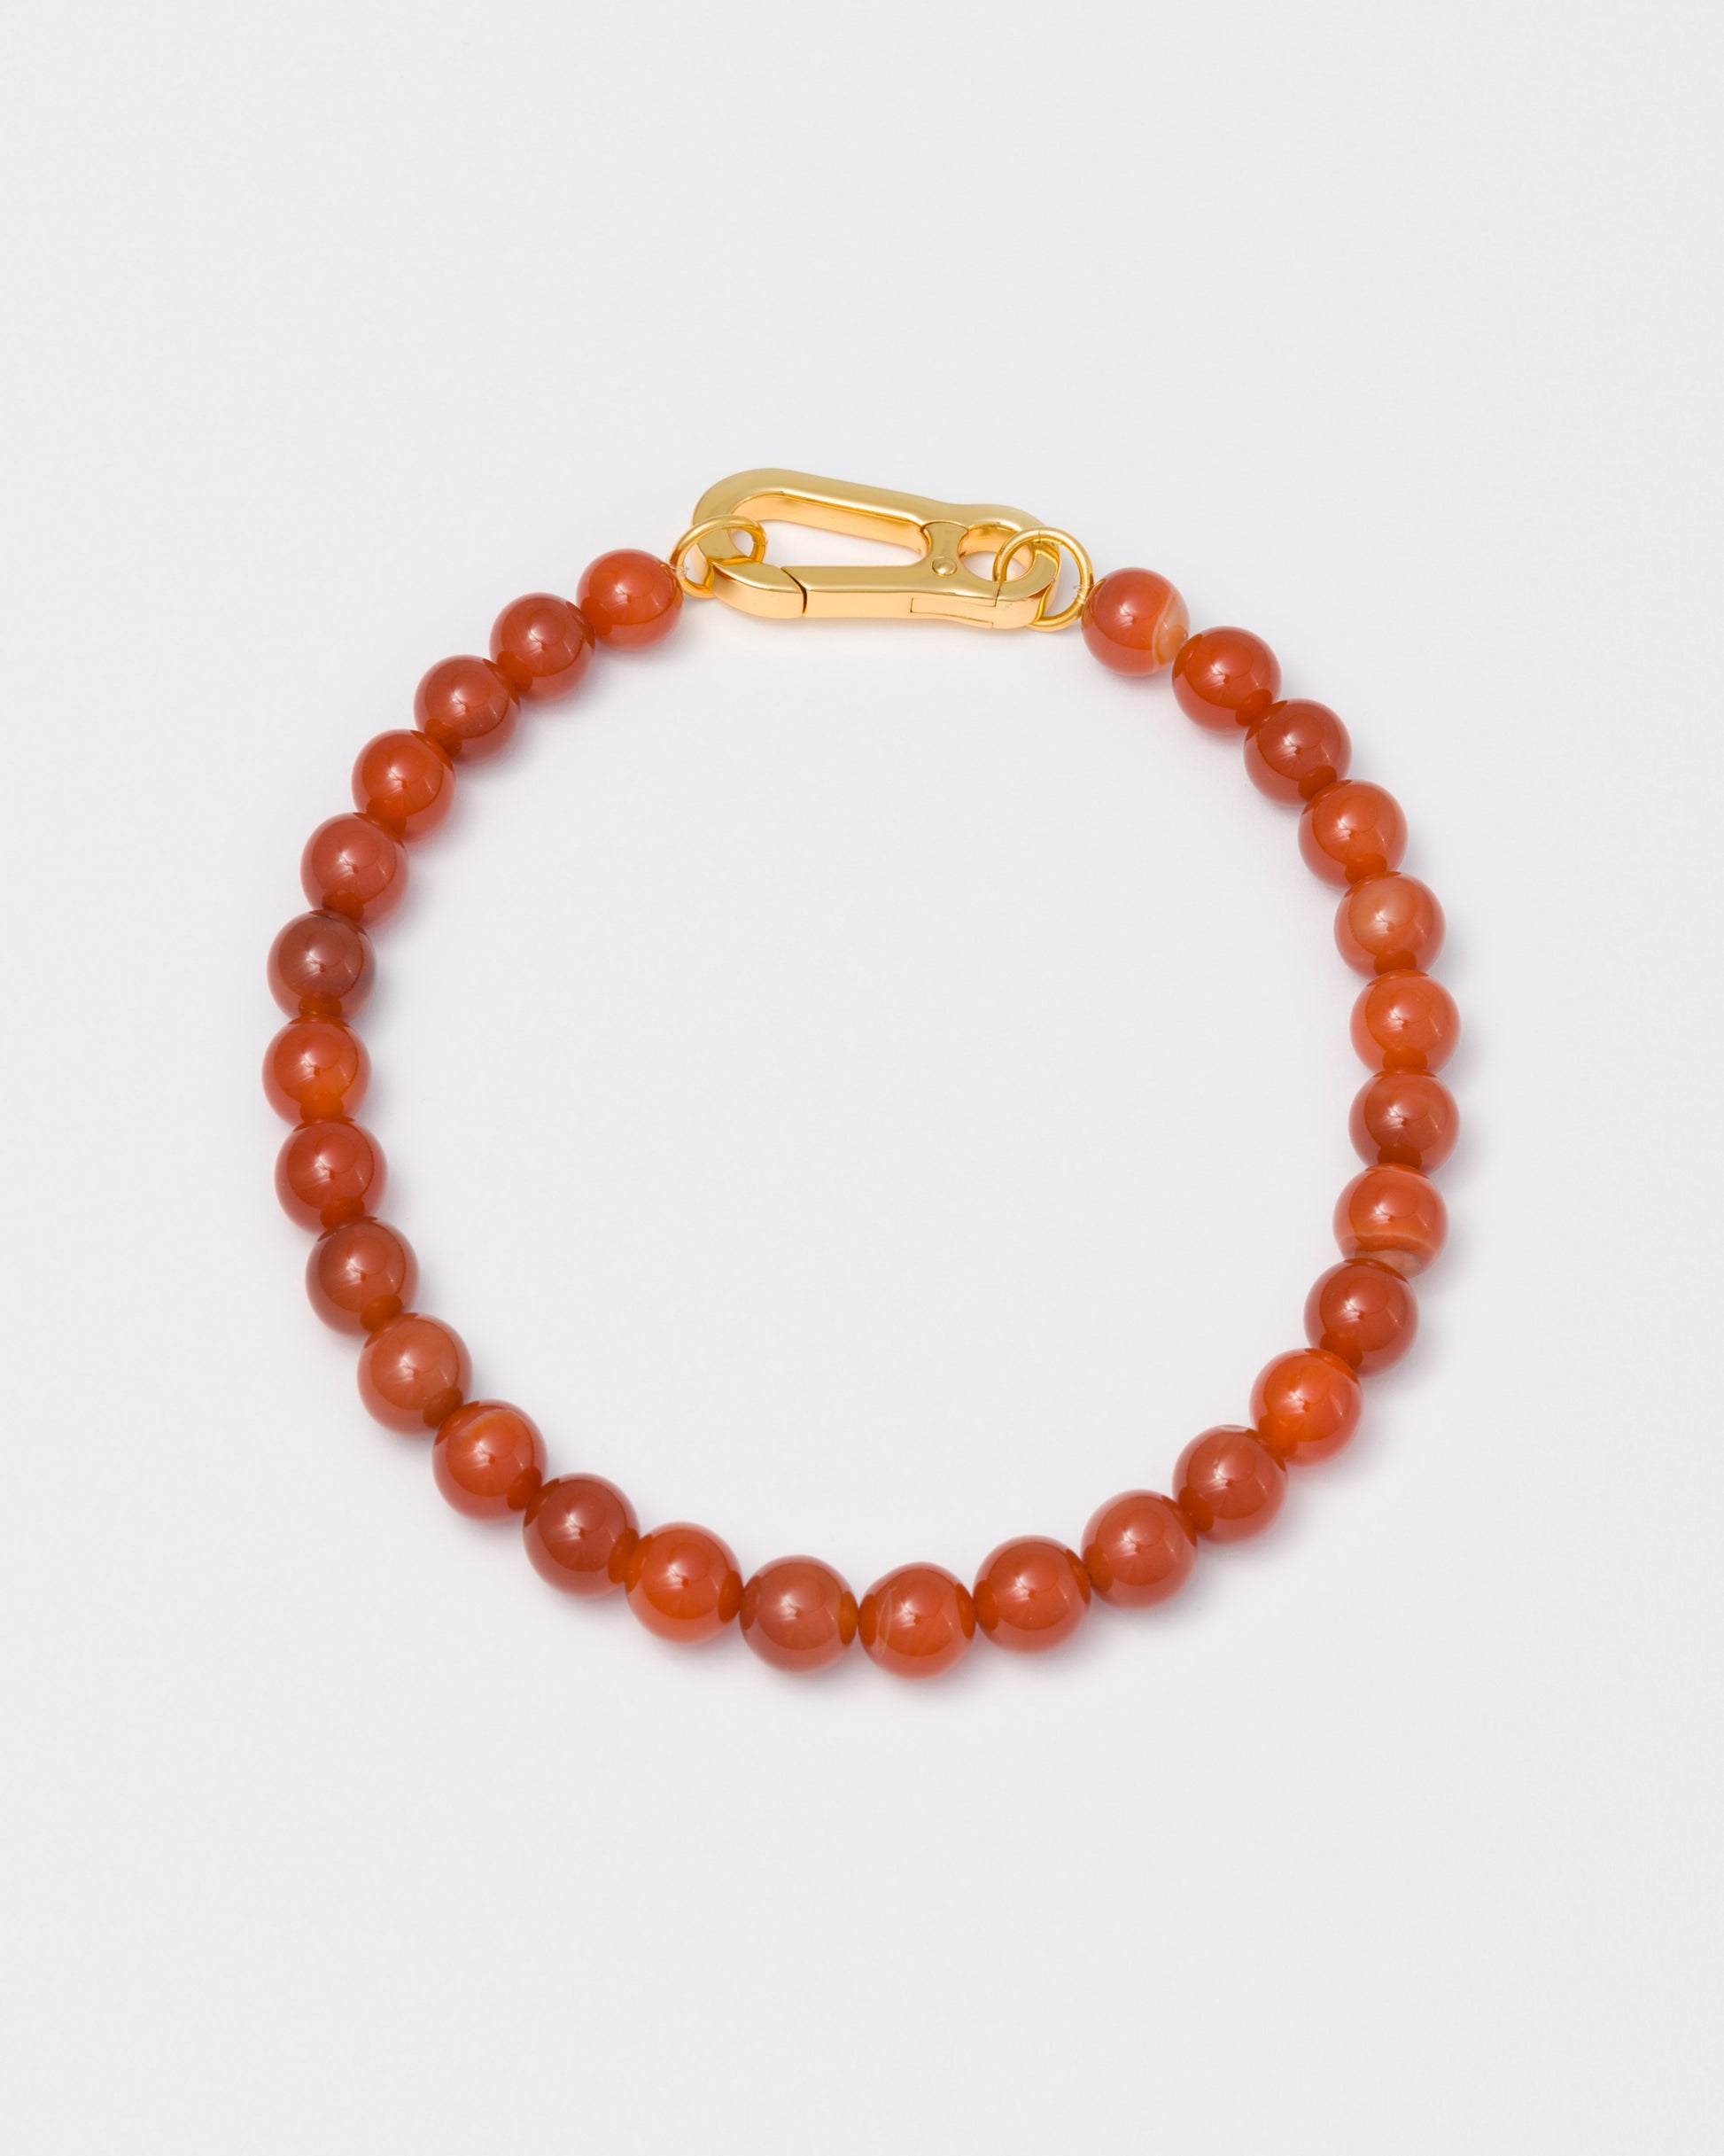 Amber stones necklace with 18k yellow gold coated lasered logo oversize carabiner clasp.